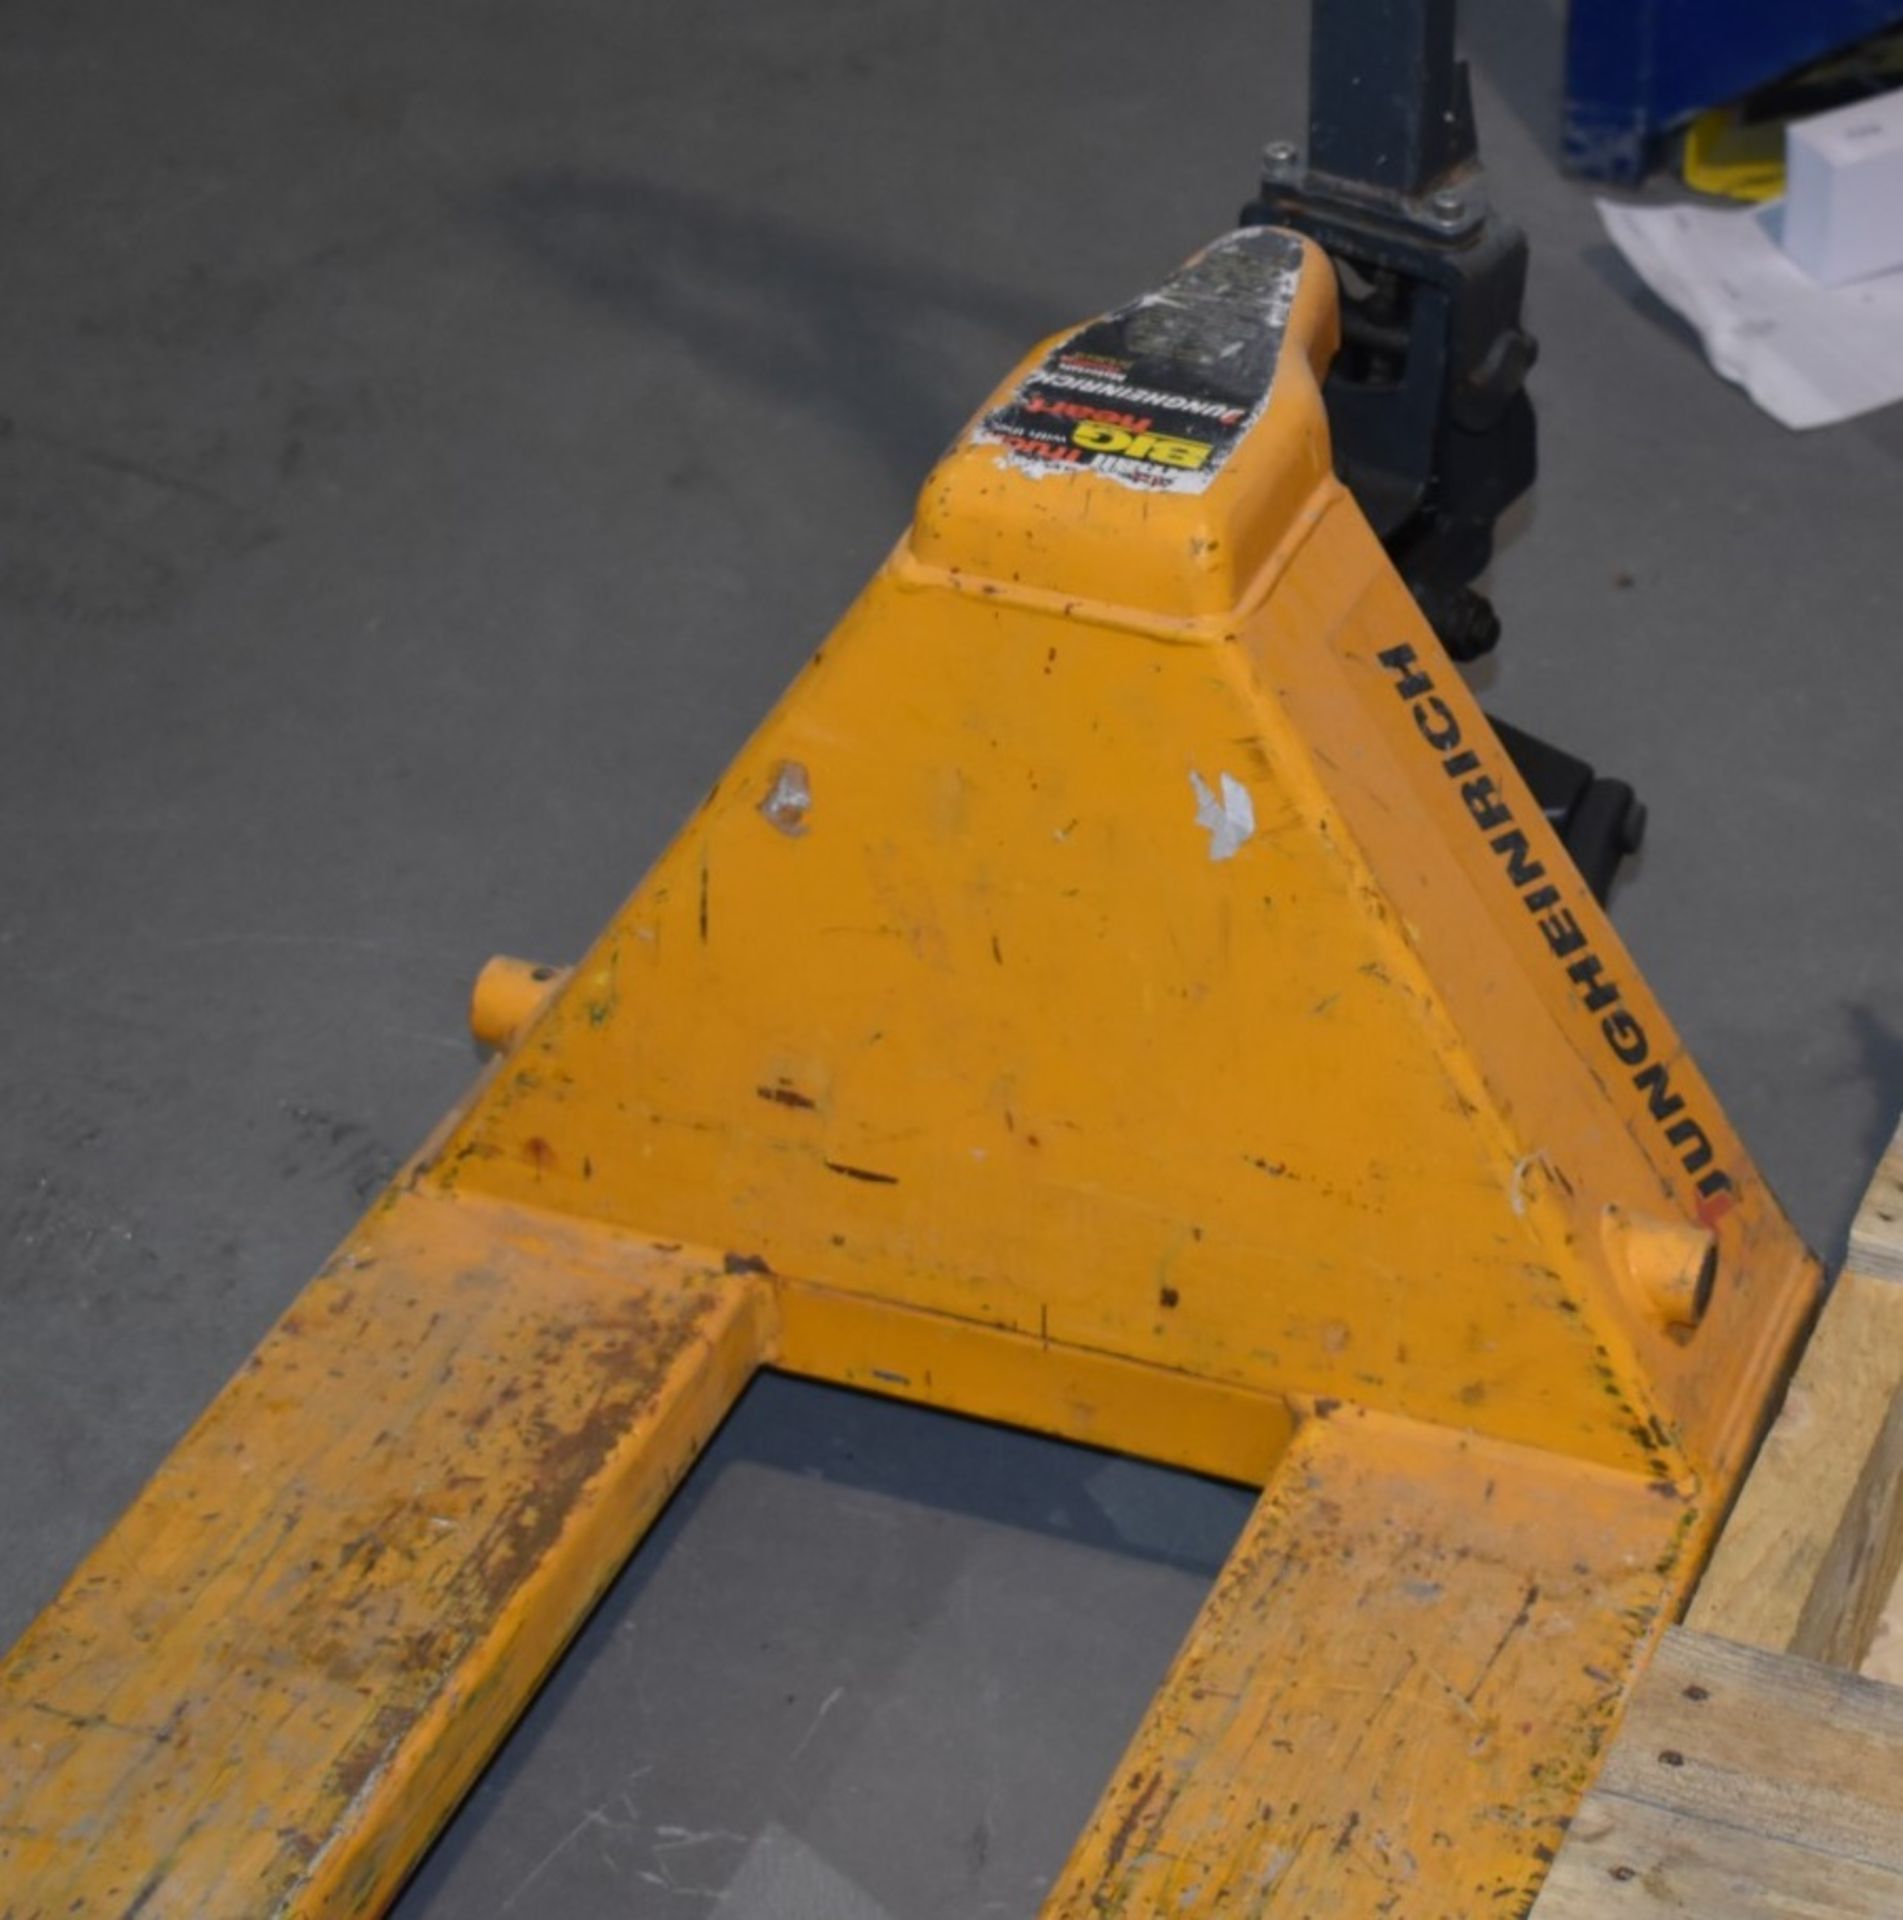 1 x Jungheinrich Pallet Pump Truck Suitable For UK or Euro Pallets PME340 - Image 5 of 5